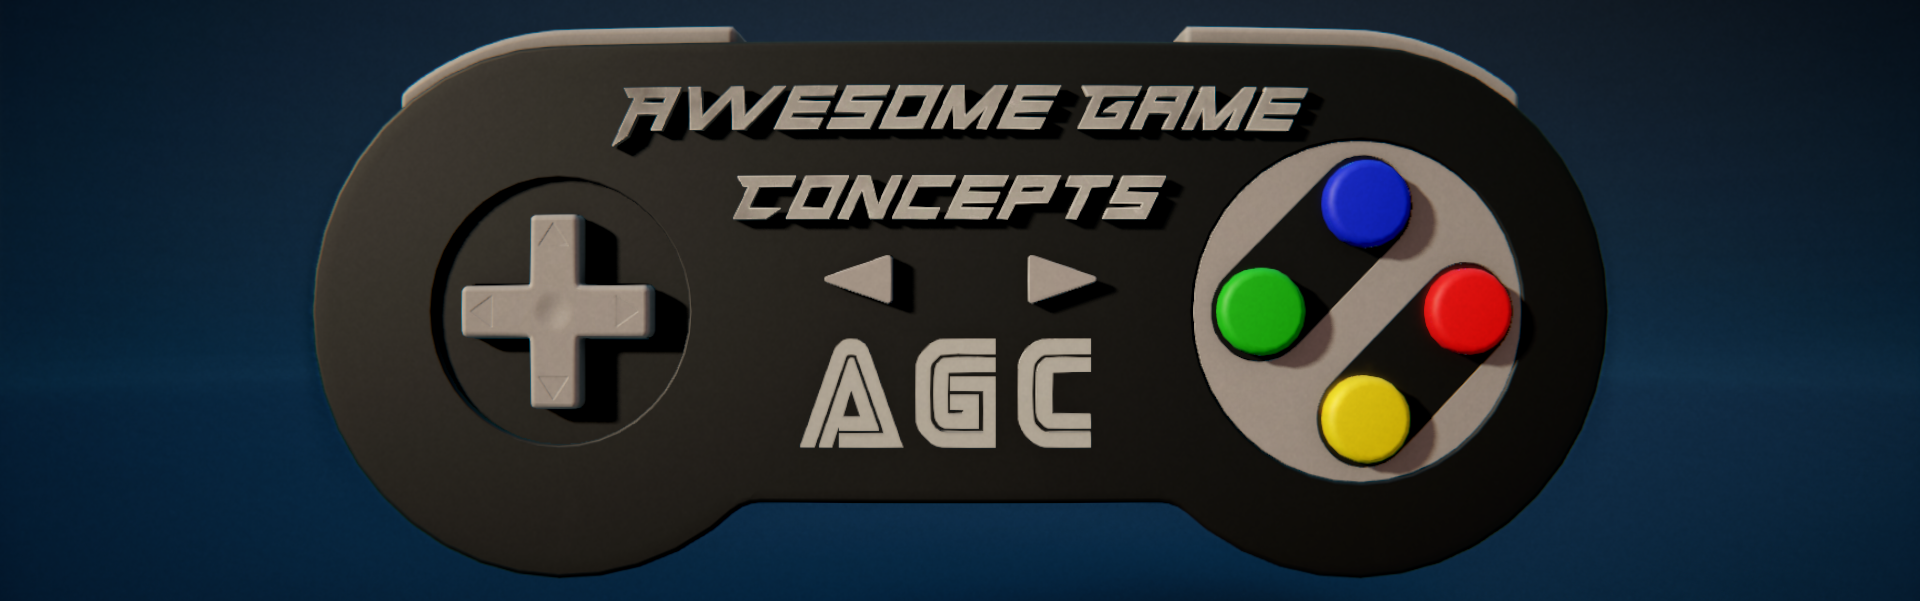 Awesome Game Concepts banner